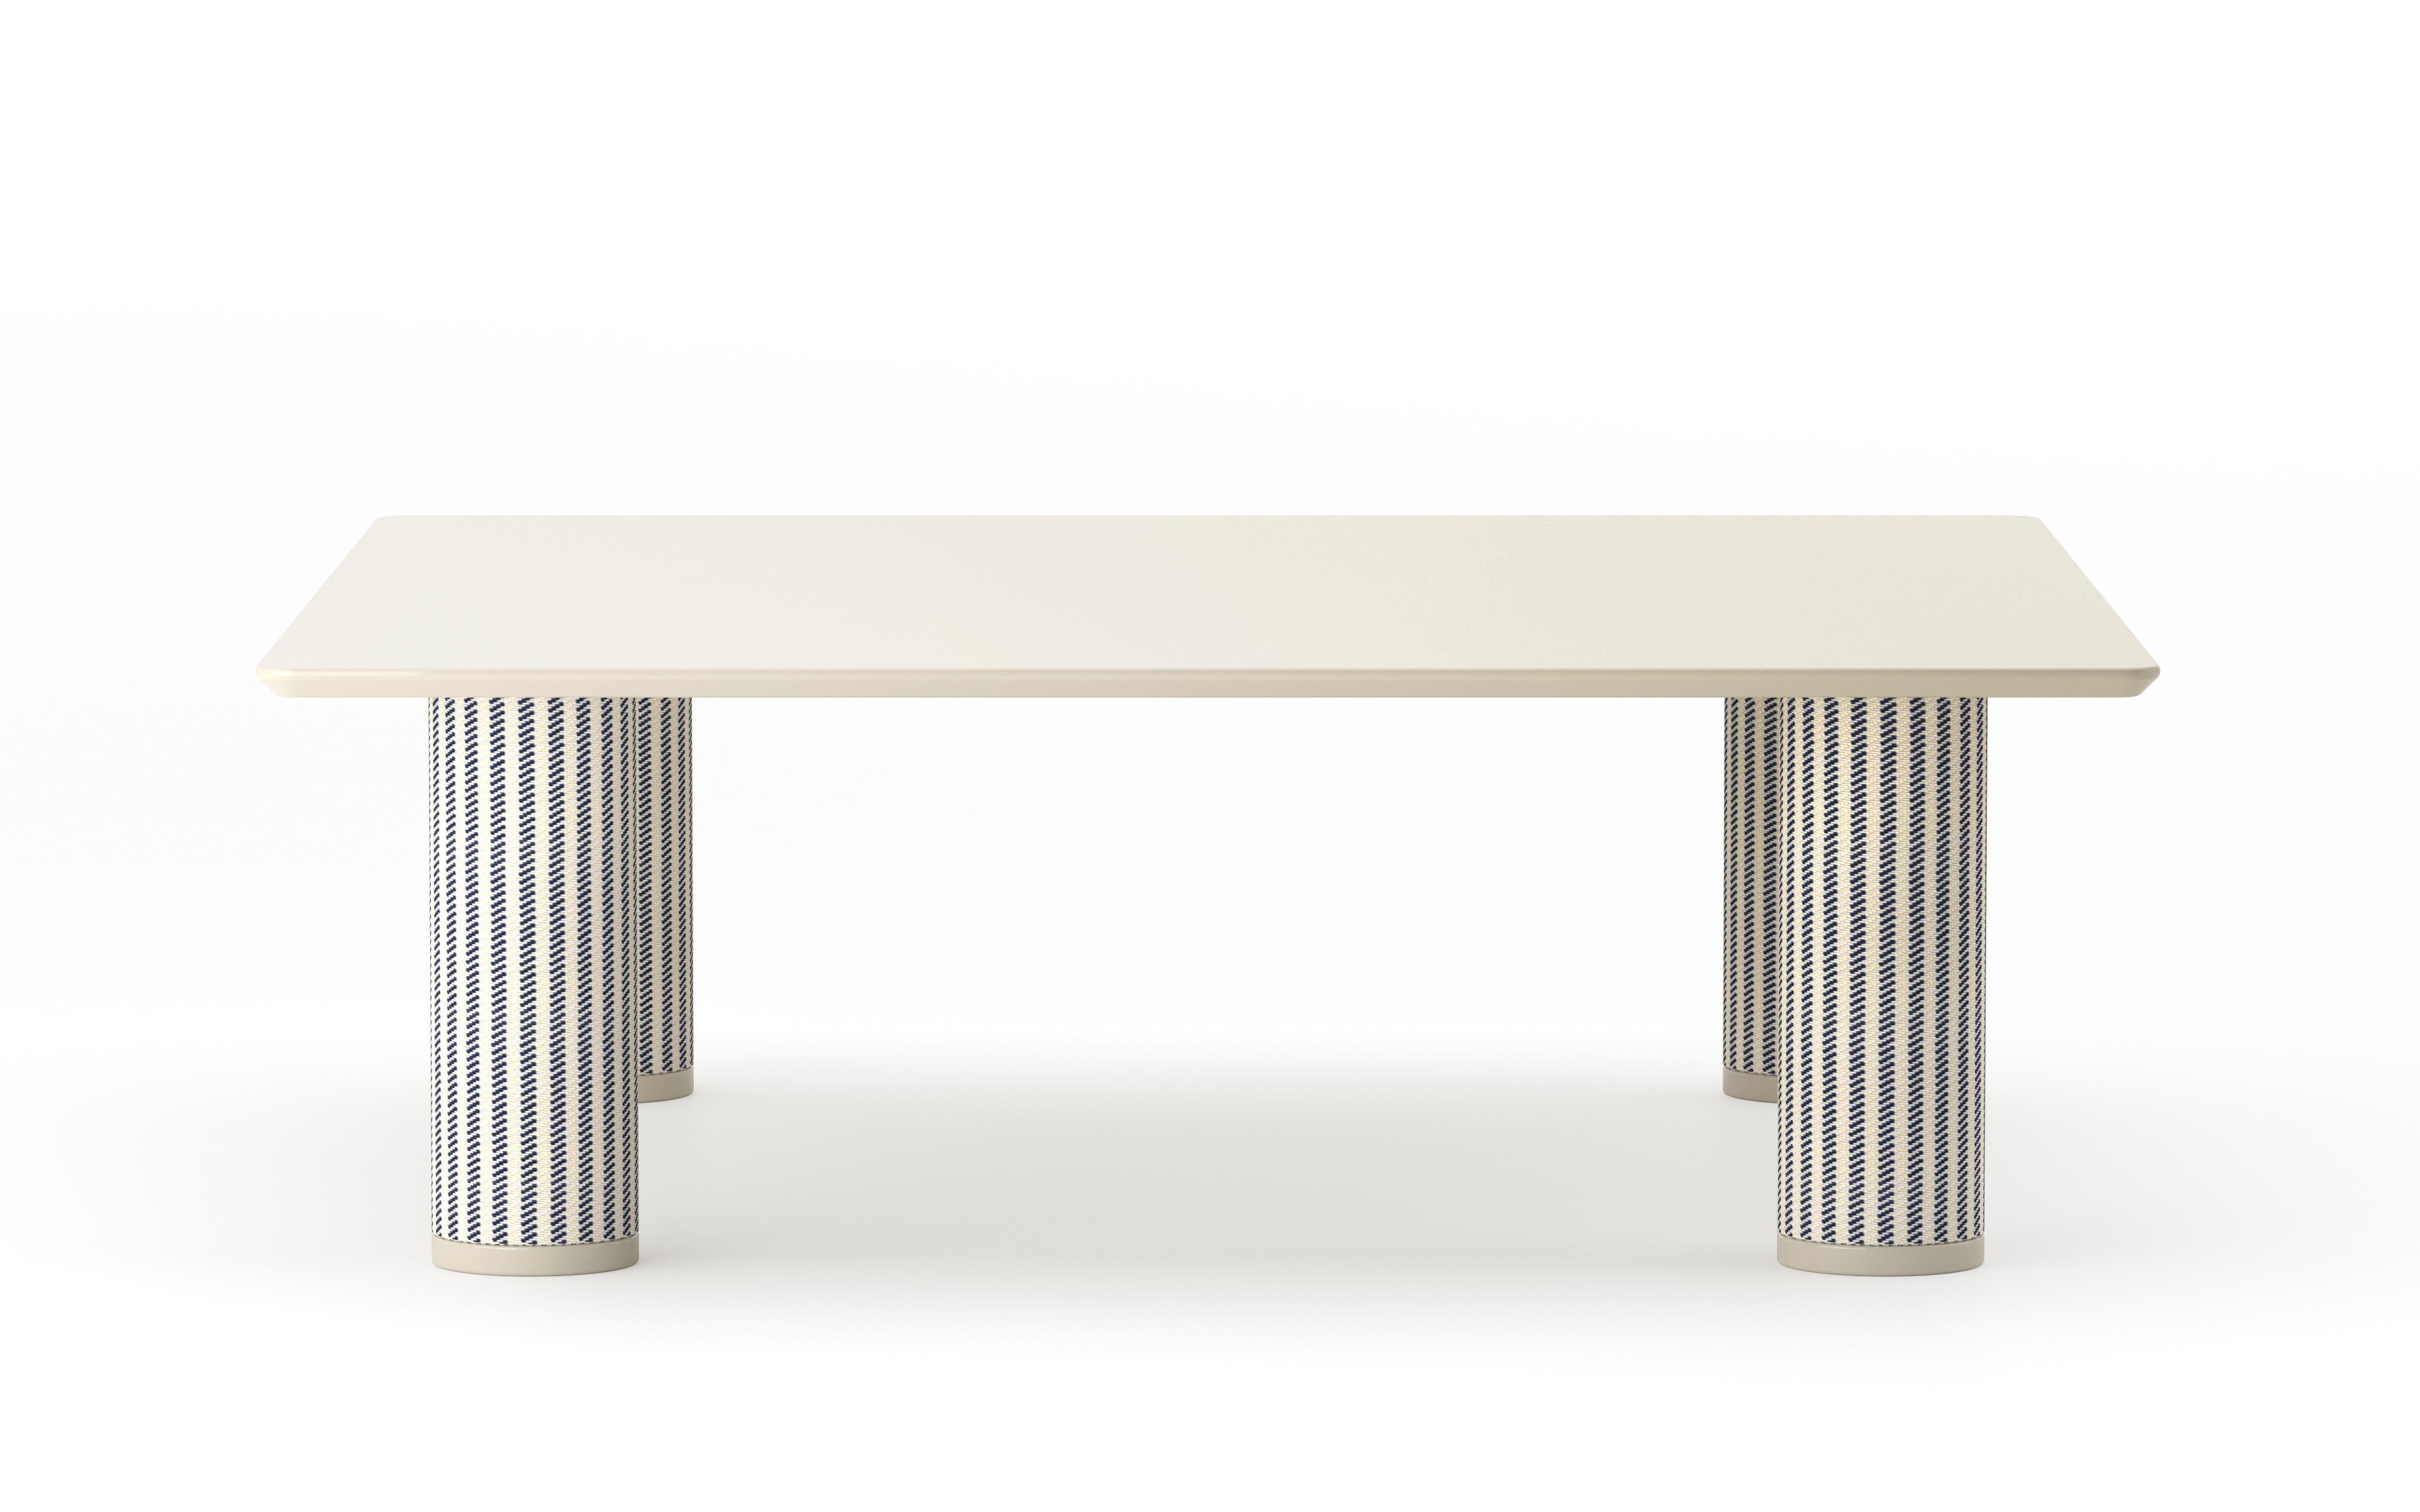 Uma square coffee table by Purho
Dimensions: D 90 x W 90 x H 30 cm
Materials: Resin, fabric upholstered legs.
Available in other colors.

UMA Square is a low table from the collection of the same name designed by Ludovica+Roberto Palomba for P